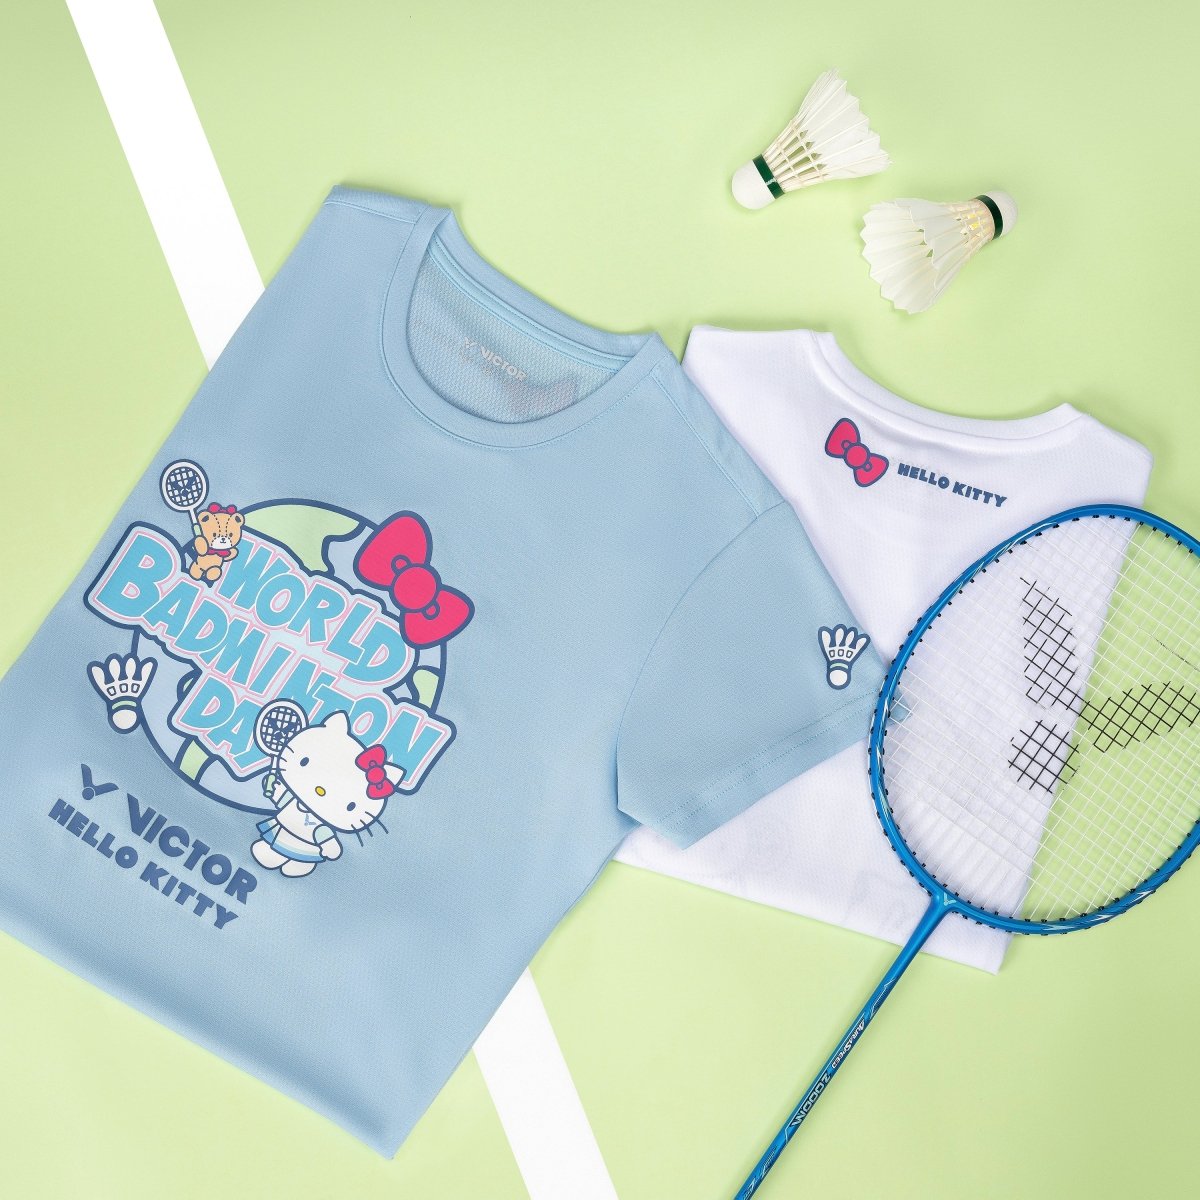 Victor USA Victor Hello Kitty T-Shirt T-KT301A (White) - B&T Racket